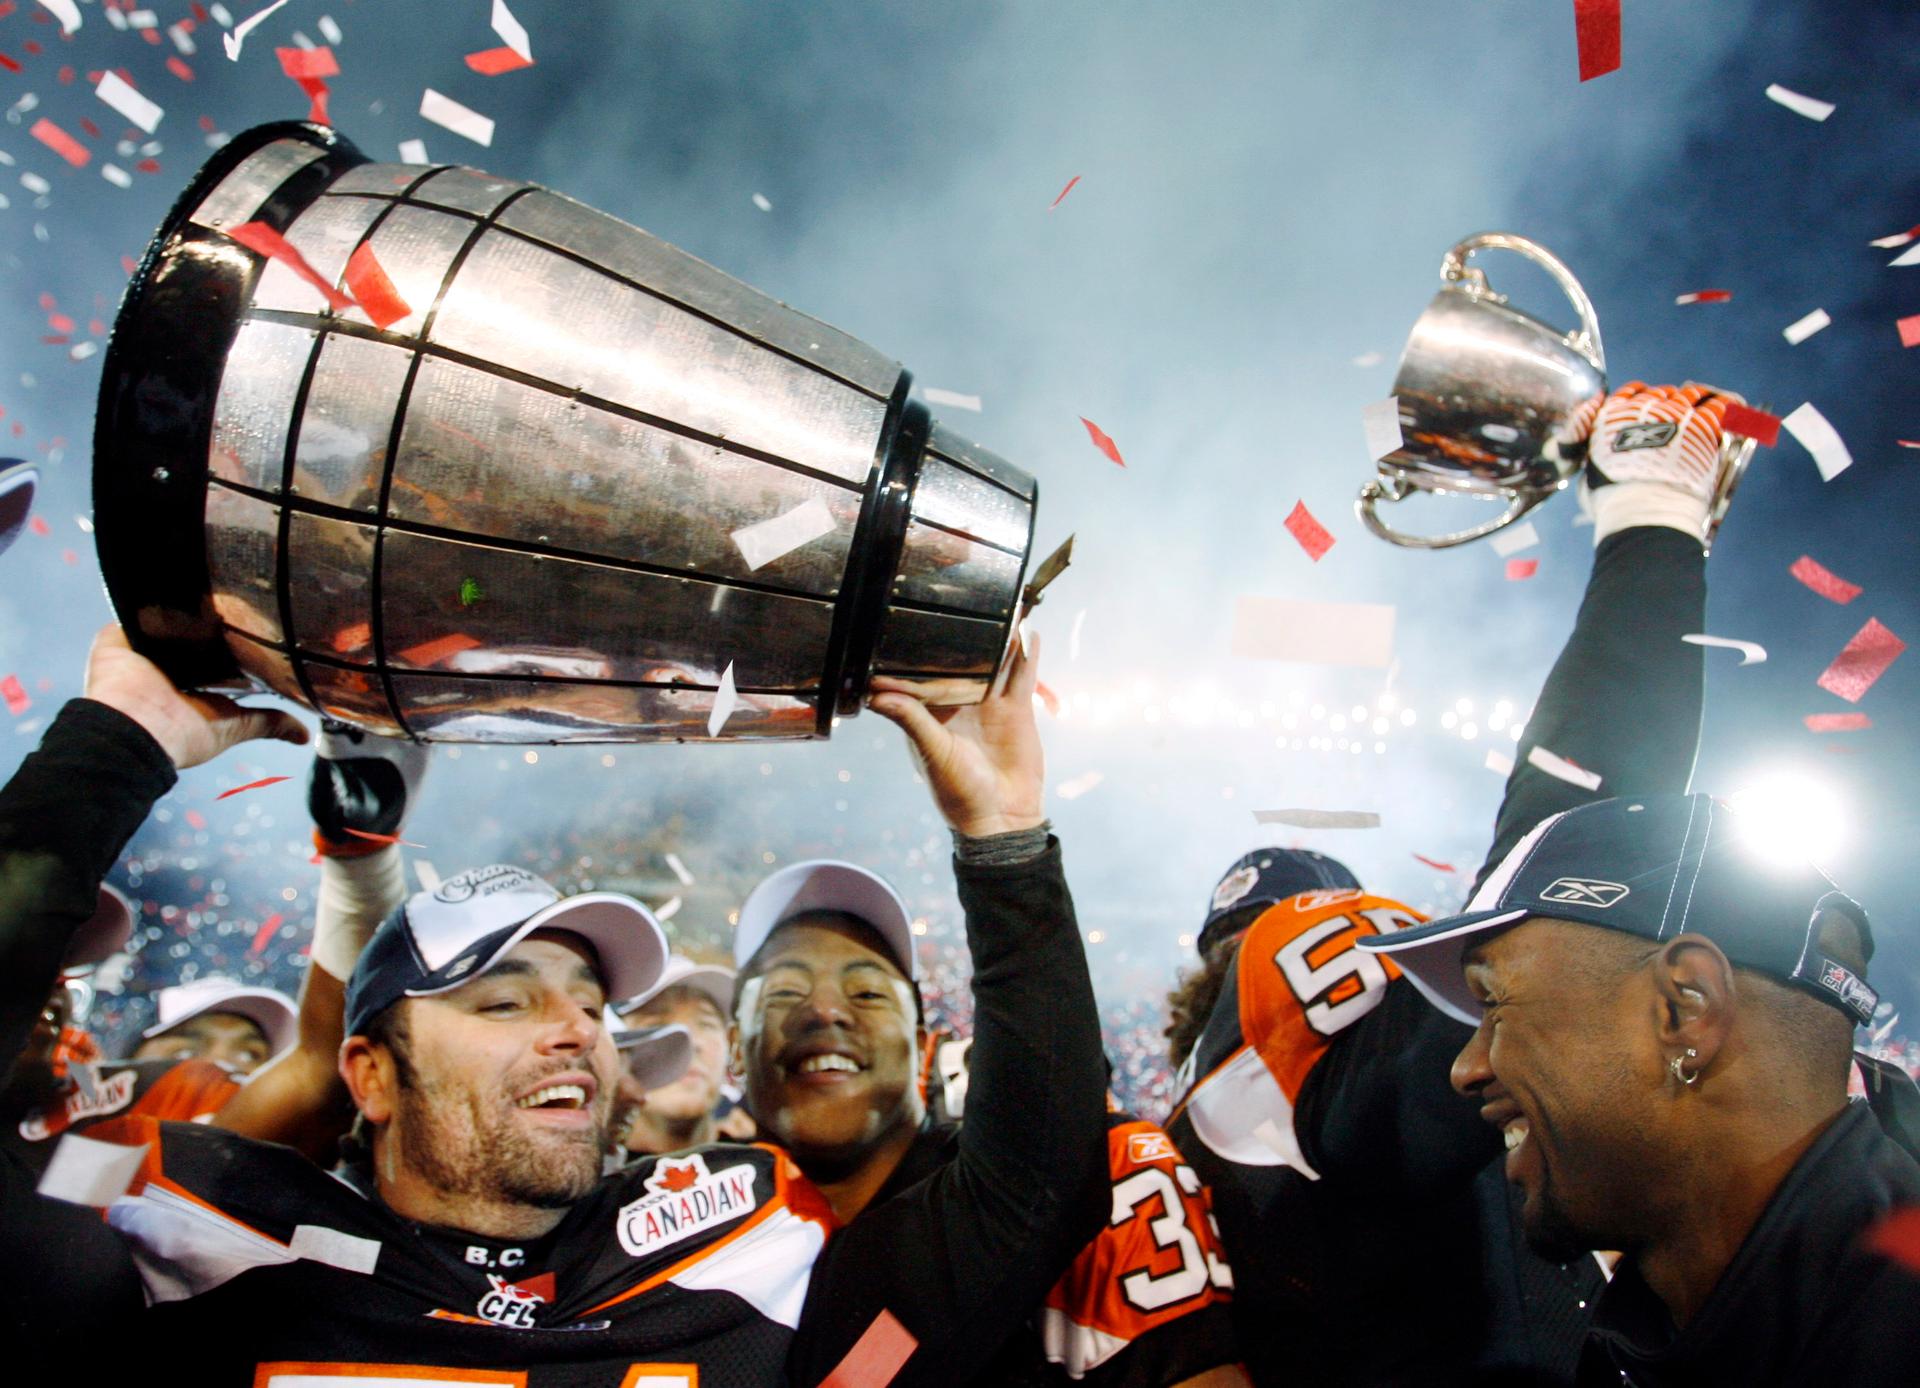 B.C. Lions players celebrate with the Grey Cup, in two pieces, after beating the Montreal Alouettes to win the Canadian Football League's 94th Grey Cup in Winnipeg November 19, 2006.